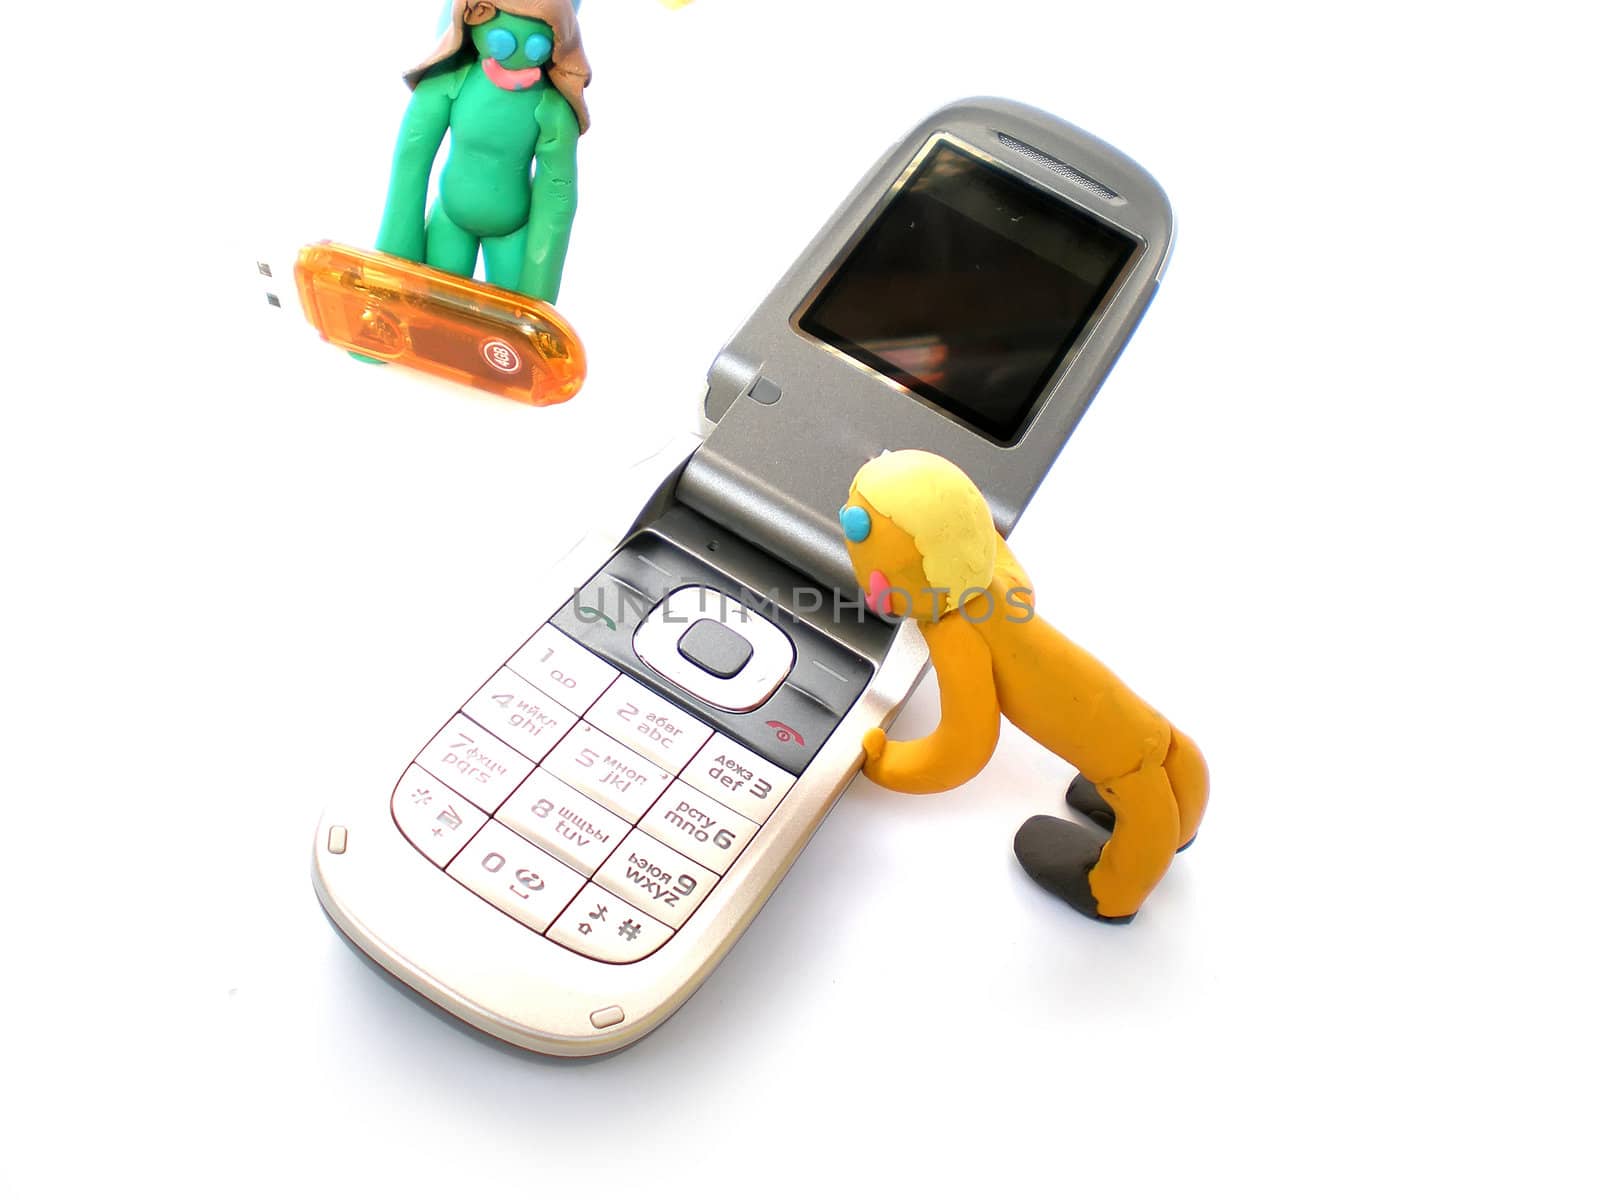 plasticine people figures with phones and usb flash by Dessie_bg